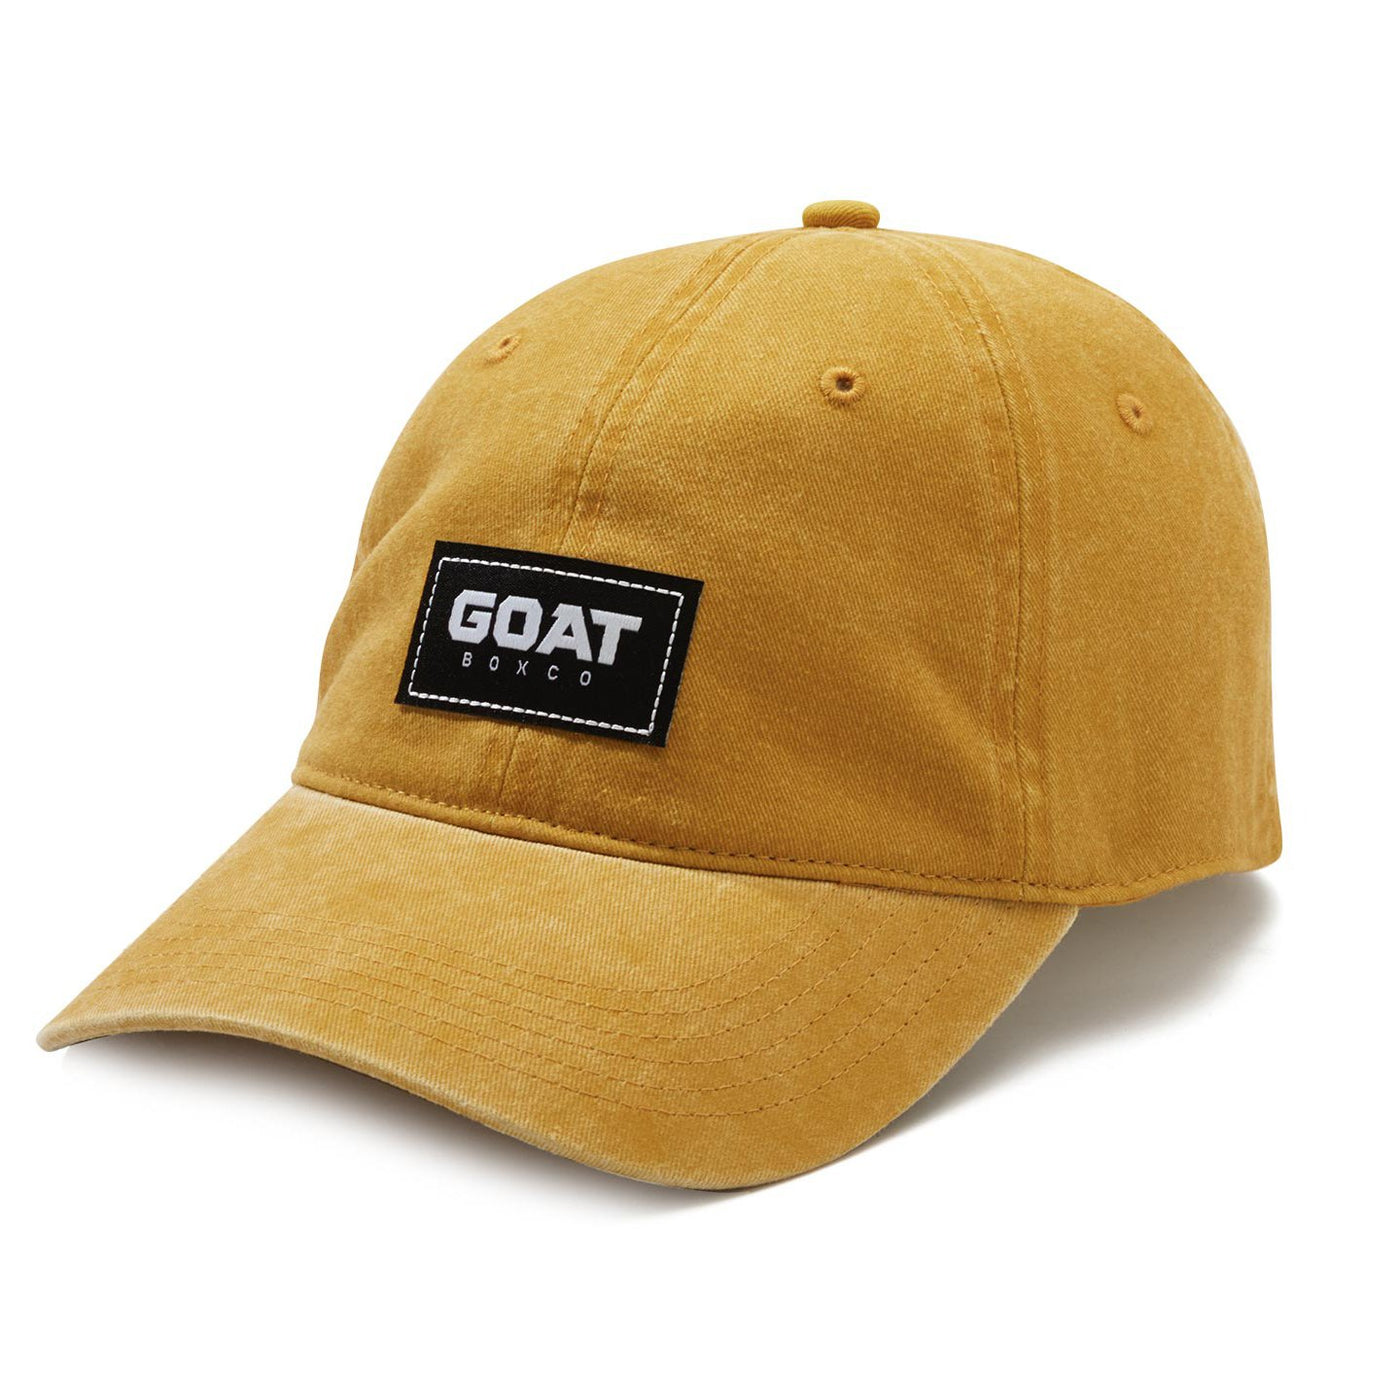 The GOAT Dad Hat